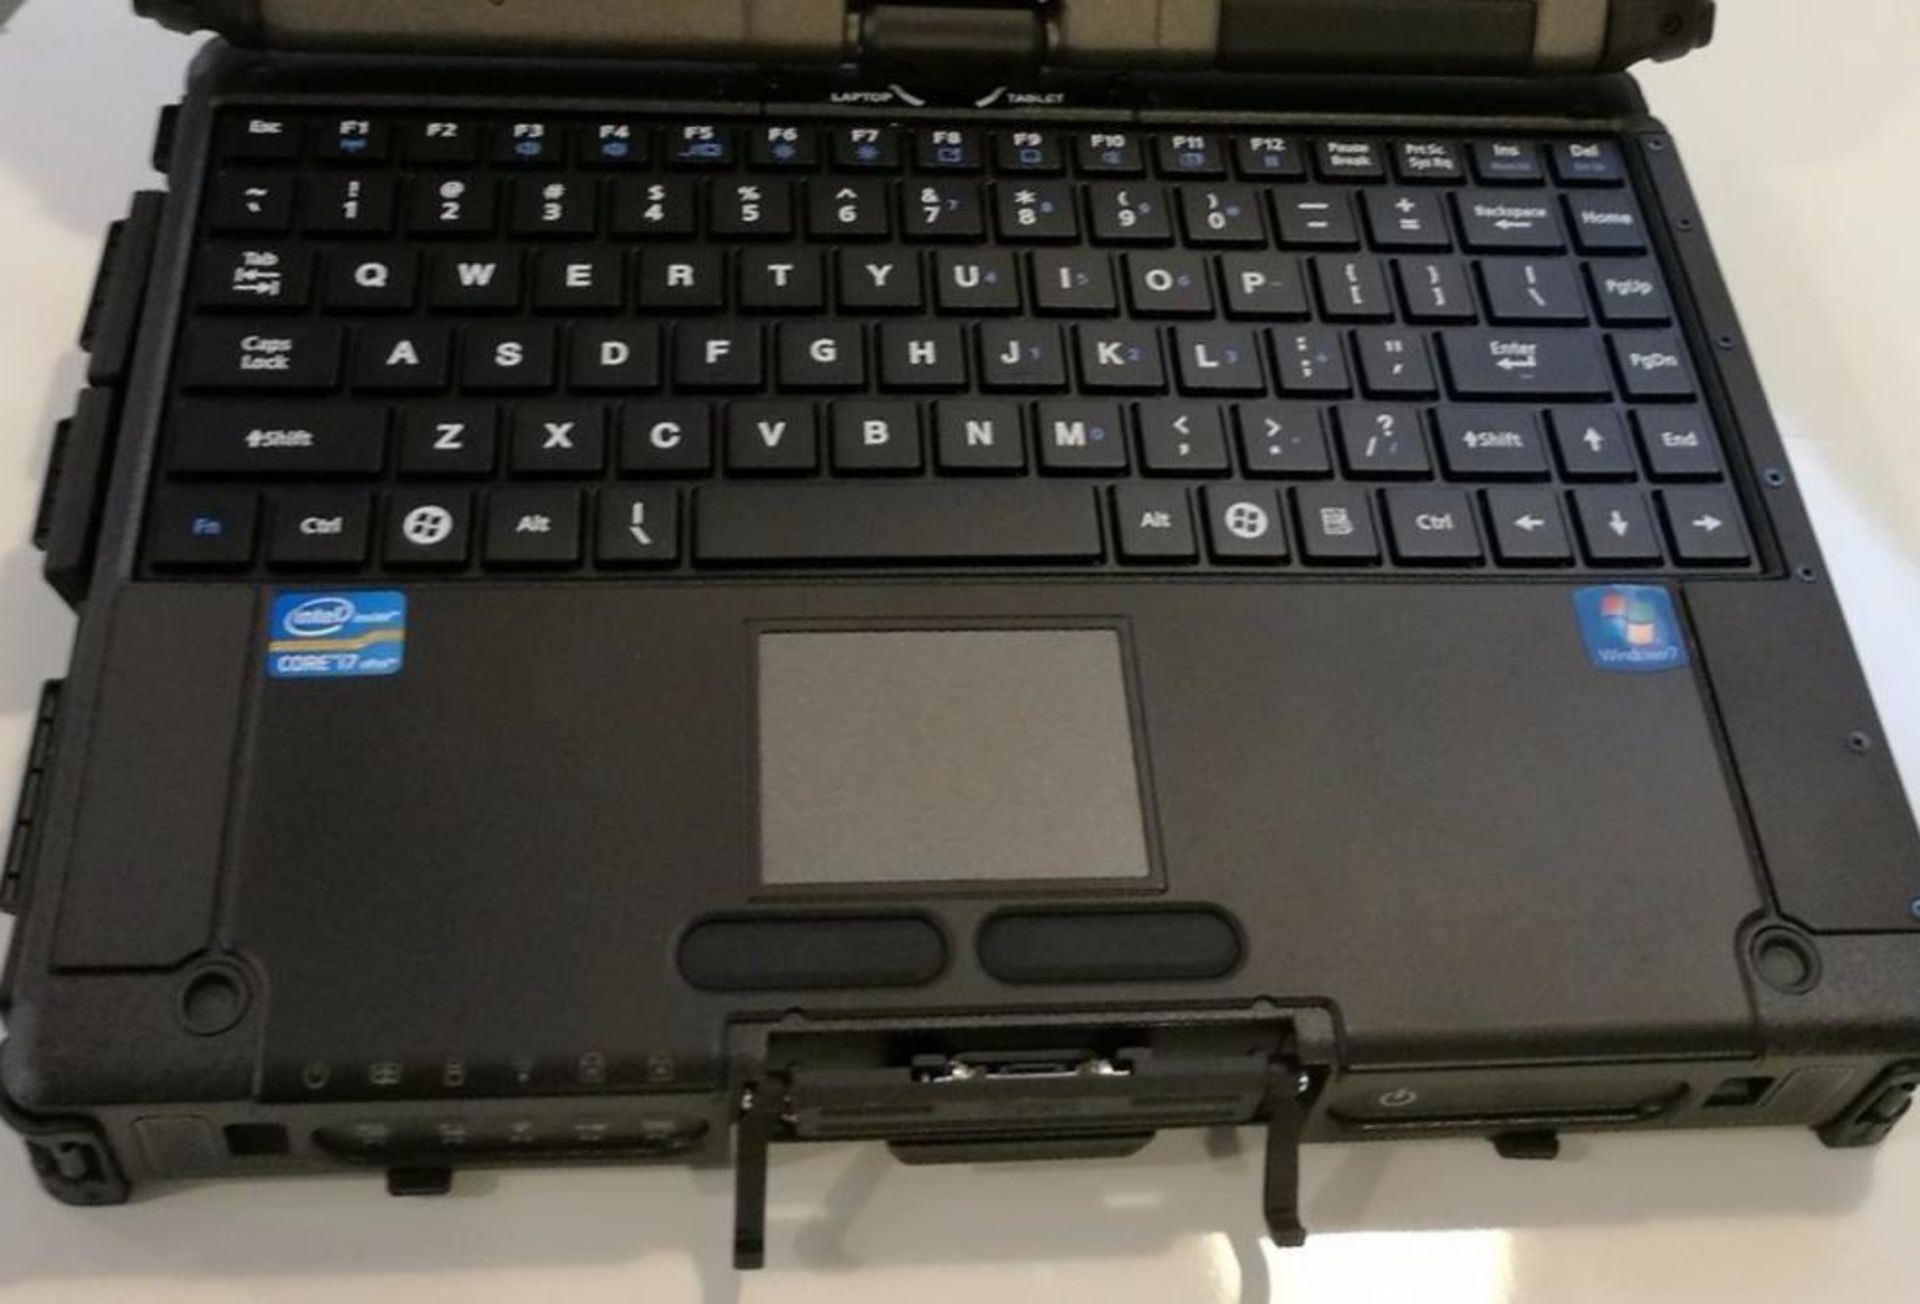 1 x Getac V200 Rugged Laptop Computer - Rugged Laptop That Transforms into a Tablet PC - Features an - Bild 4 aus 7